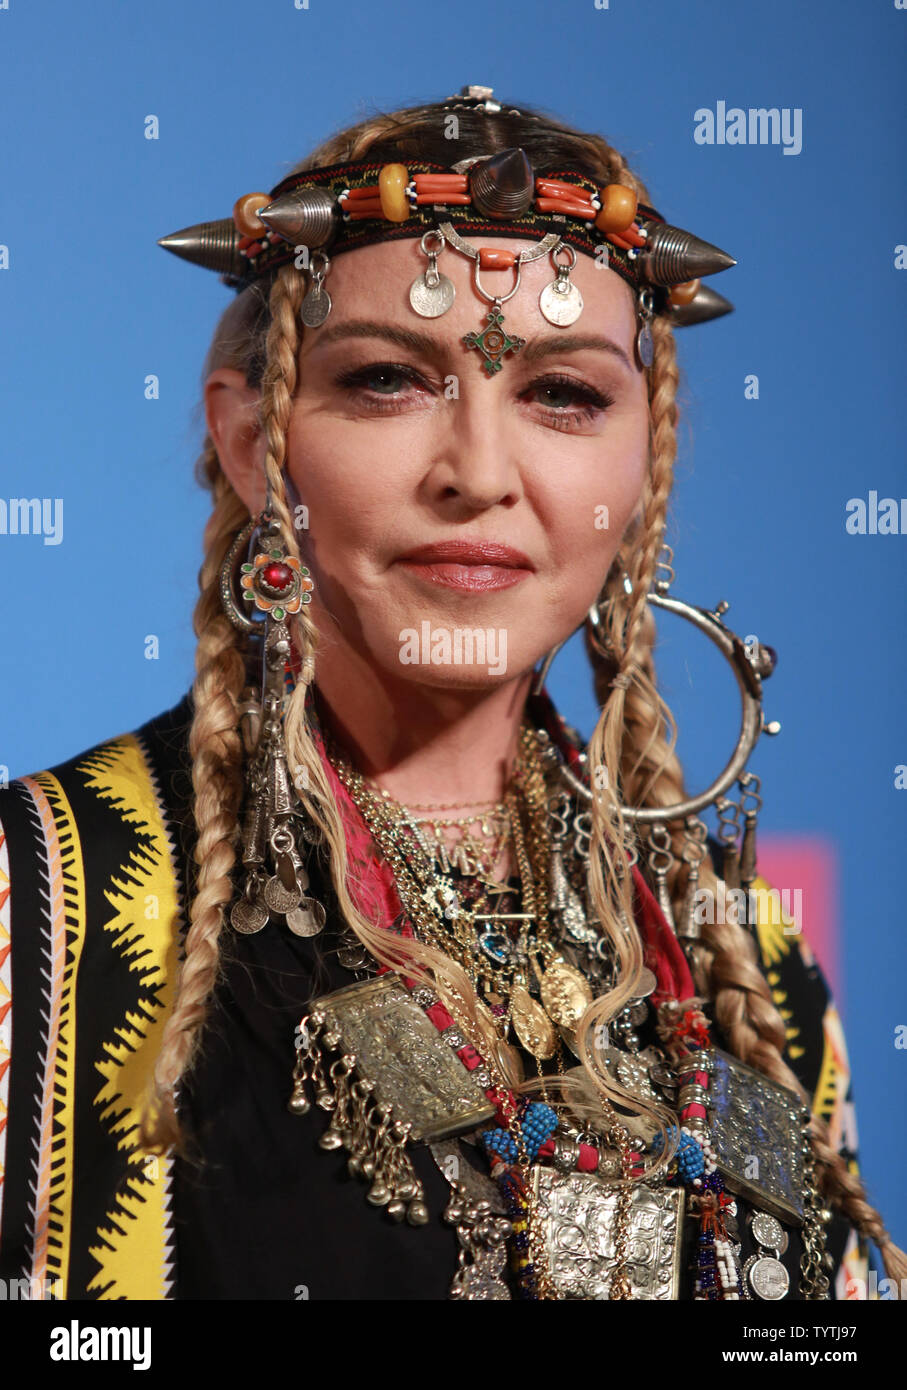 Madonna pose for photographers in the press room at the 35th annual MTV Video Music Awards at Radio City Music Hall in New York City on August 20, 2018.    Photo by Serena Xu-Ning/UPI Stock Photo